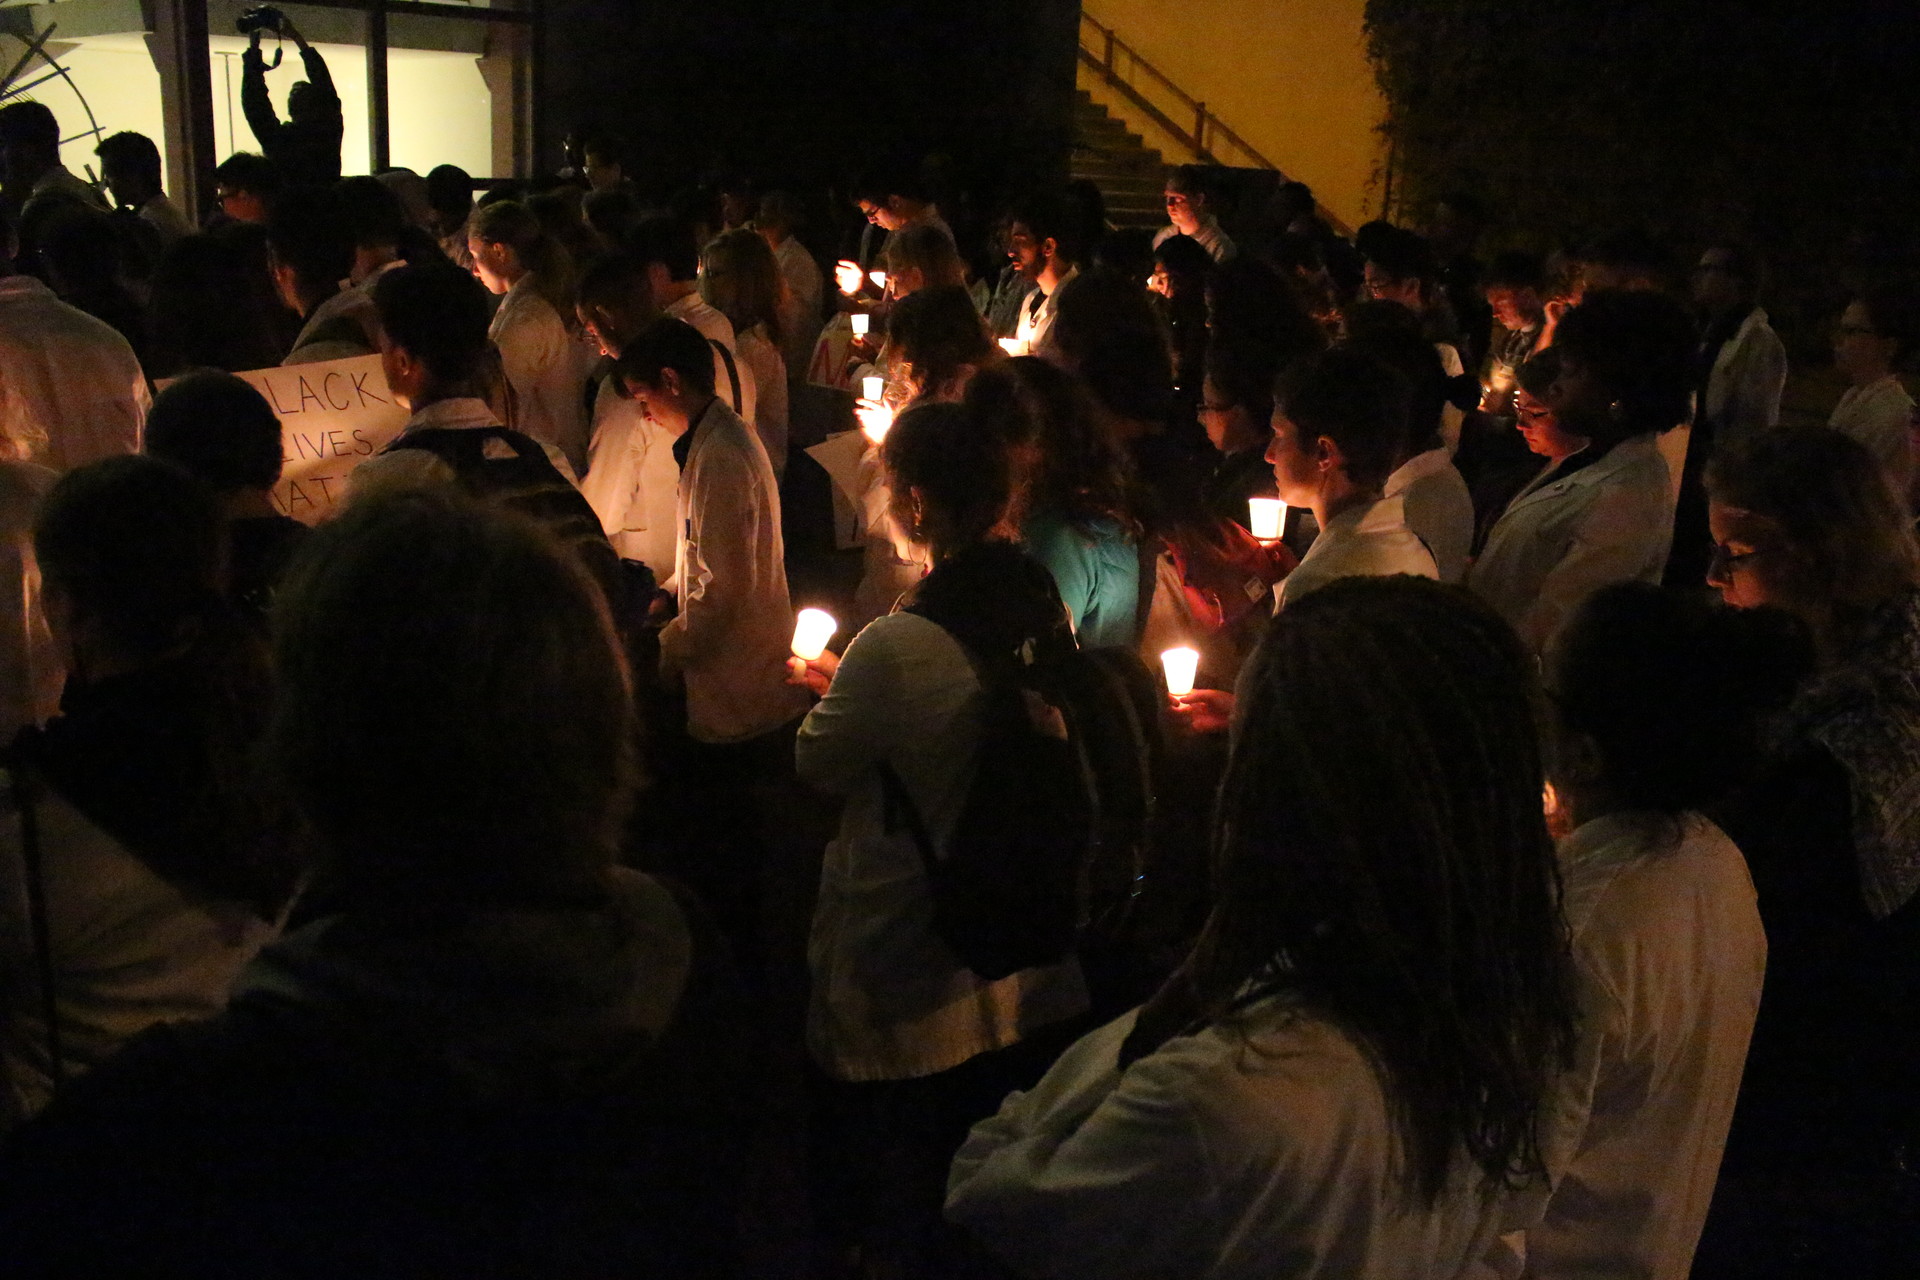 Future doctors, nurses, pharmacists and dentists attend a vigil in San Francisco on Sept. 27, 2016 for recent African American victims of fatal police shootings. Organizers of the White Coats For Black Lives vigil say health care professionals must act against racism in health care and elsewhere in society. 